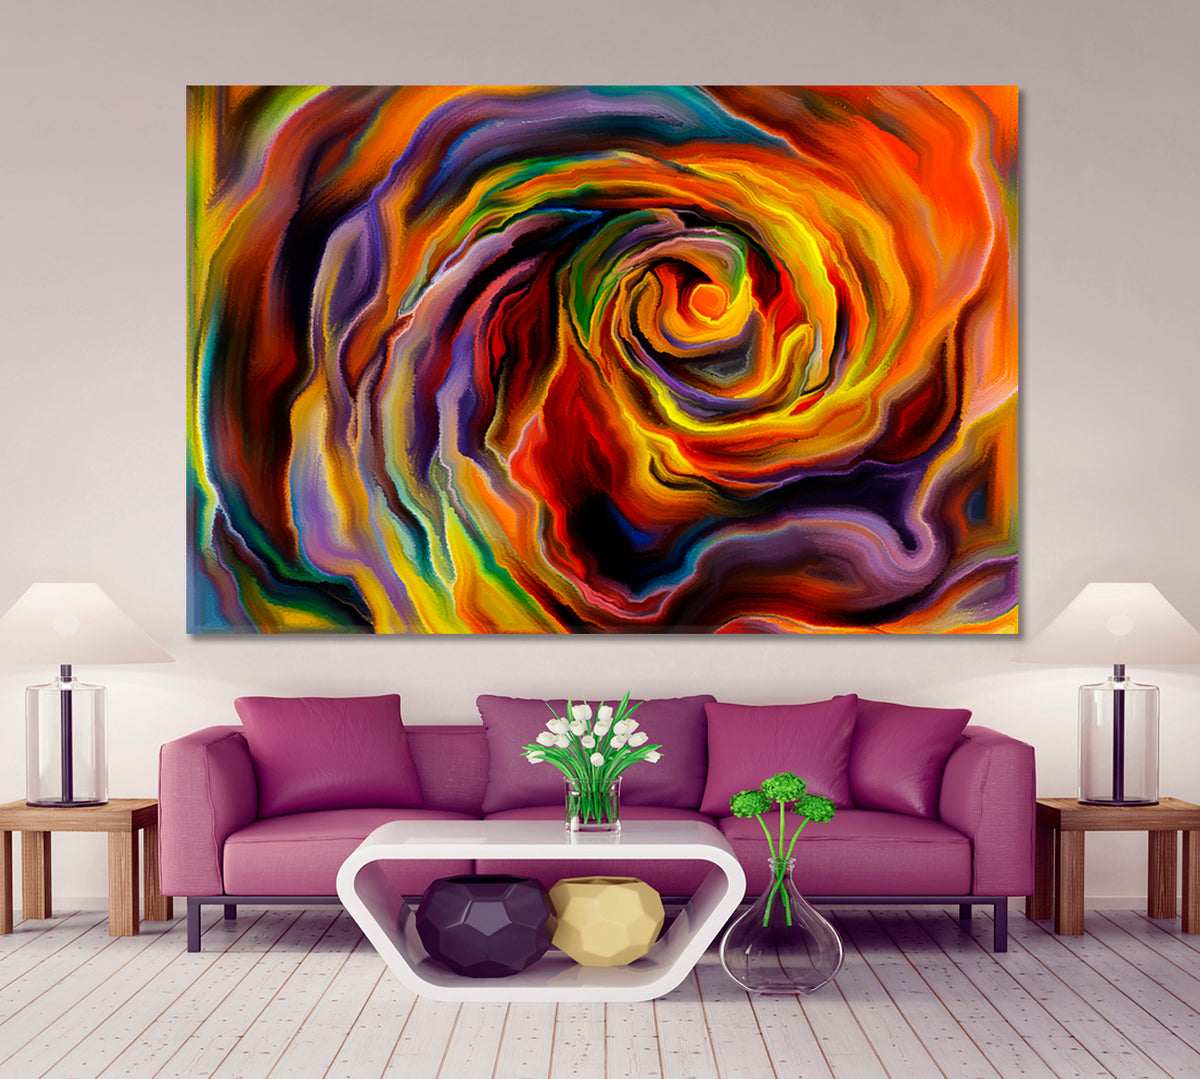 FORMS Magical Abstract Vivid Whirlpool Abstract Art Print Artesty 1 panel 24" x 16" 